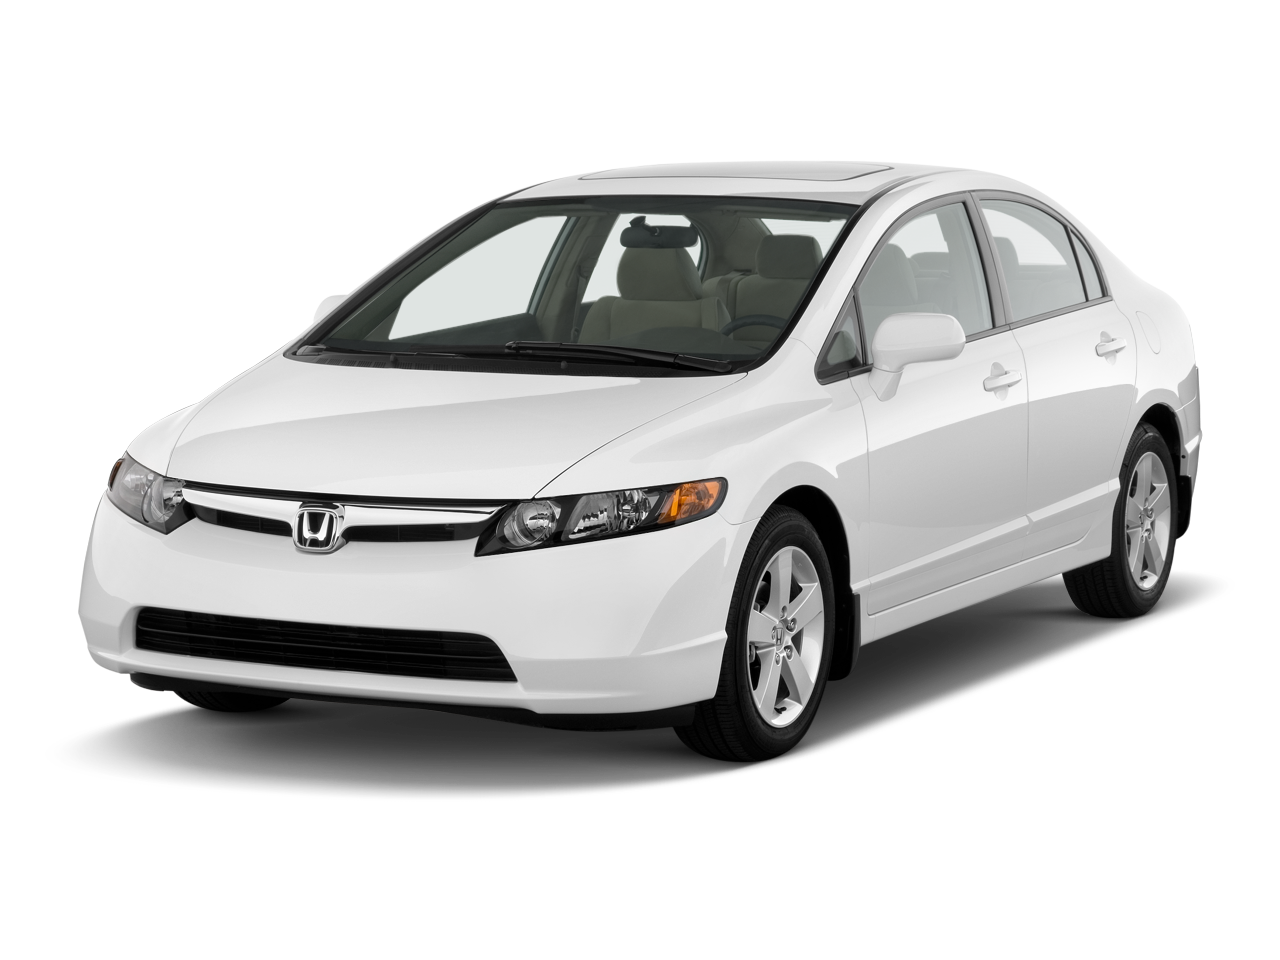 2008 Honda Civic Prices, Reviews, and Photos - MotorTrend